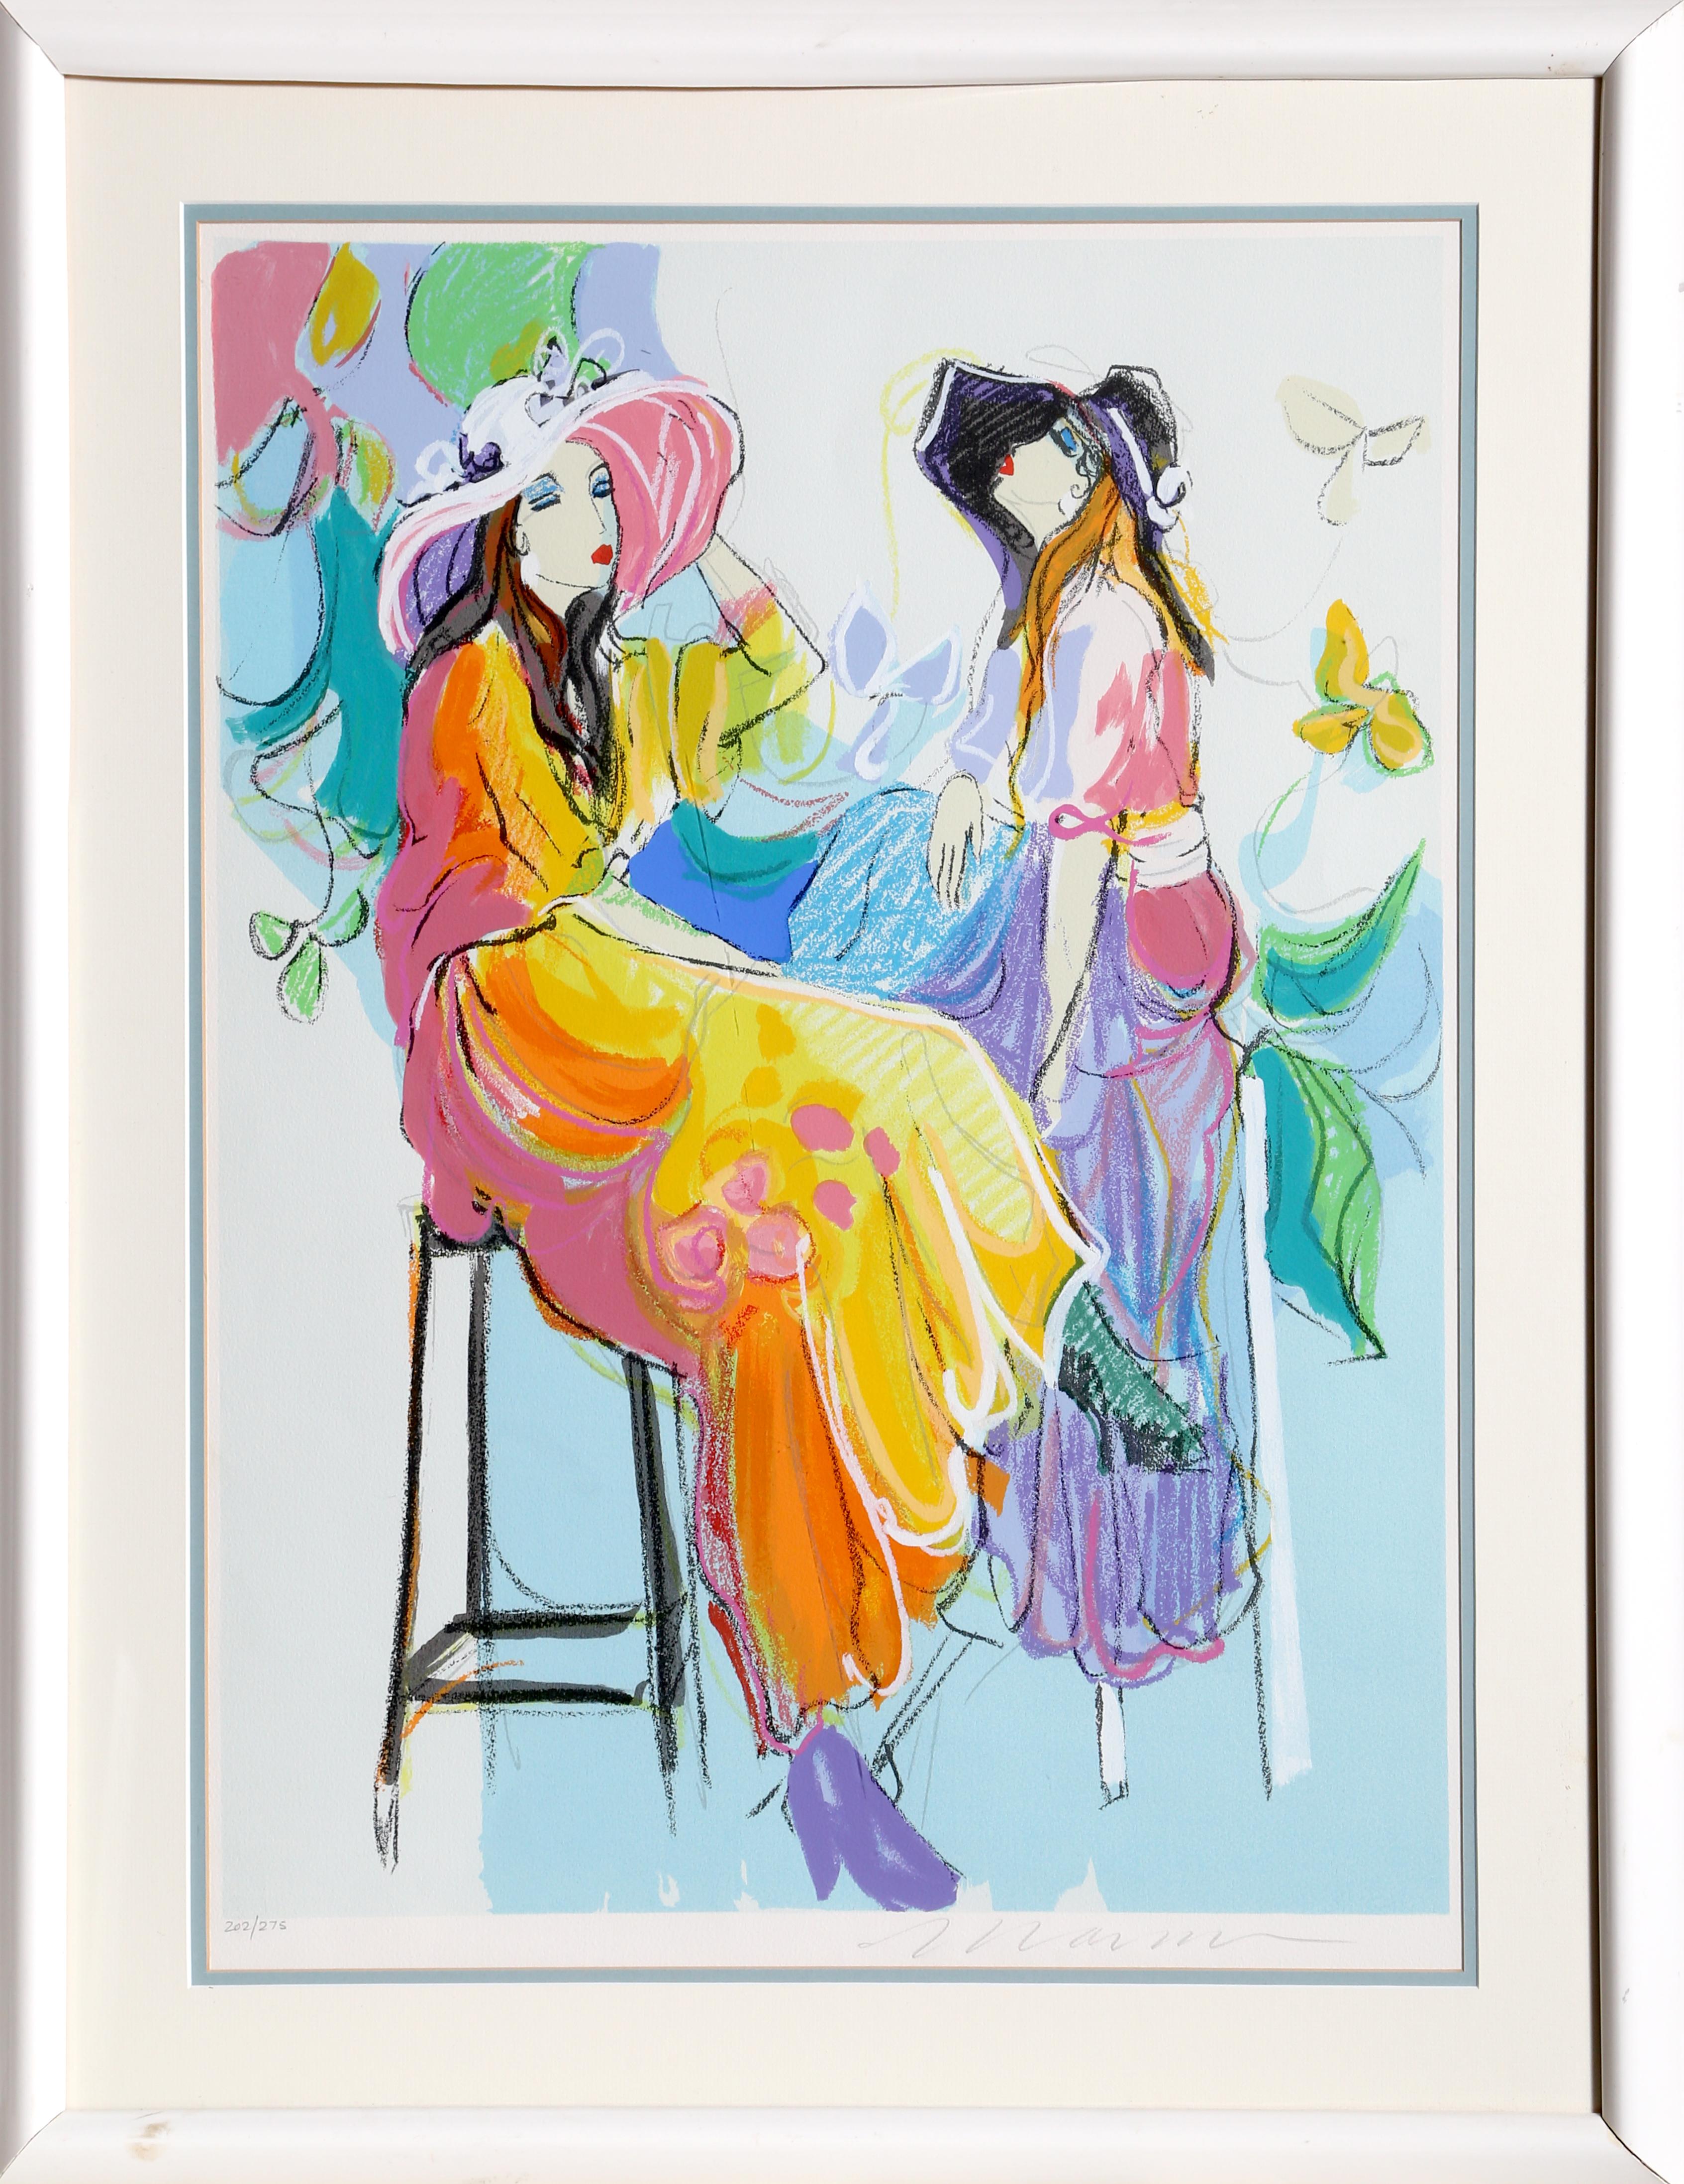 Les Coquettes II by Isaac Maimon, Israeli/French (1951)
Date: 1994
Screenprint, signed and numbered in pencil
Edition of 202/275
Image Size: 27 x 20 inches
Size: 31.5 in. x 23.5 in. (80.01 cm x 59.69 cm)
Frame Size: 36 x 28 inches